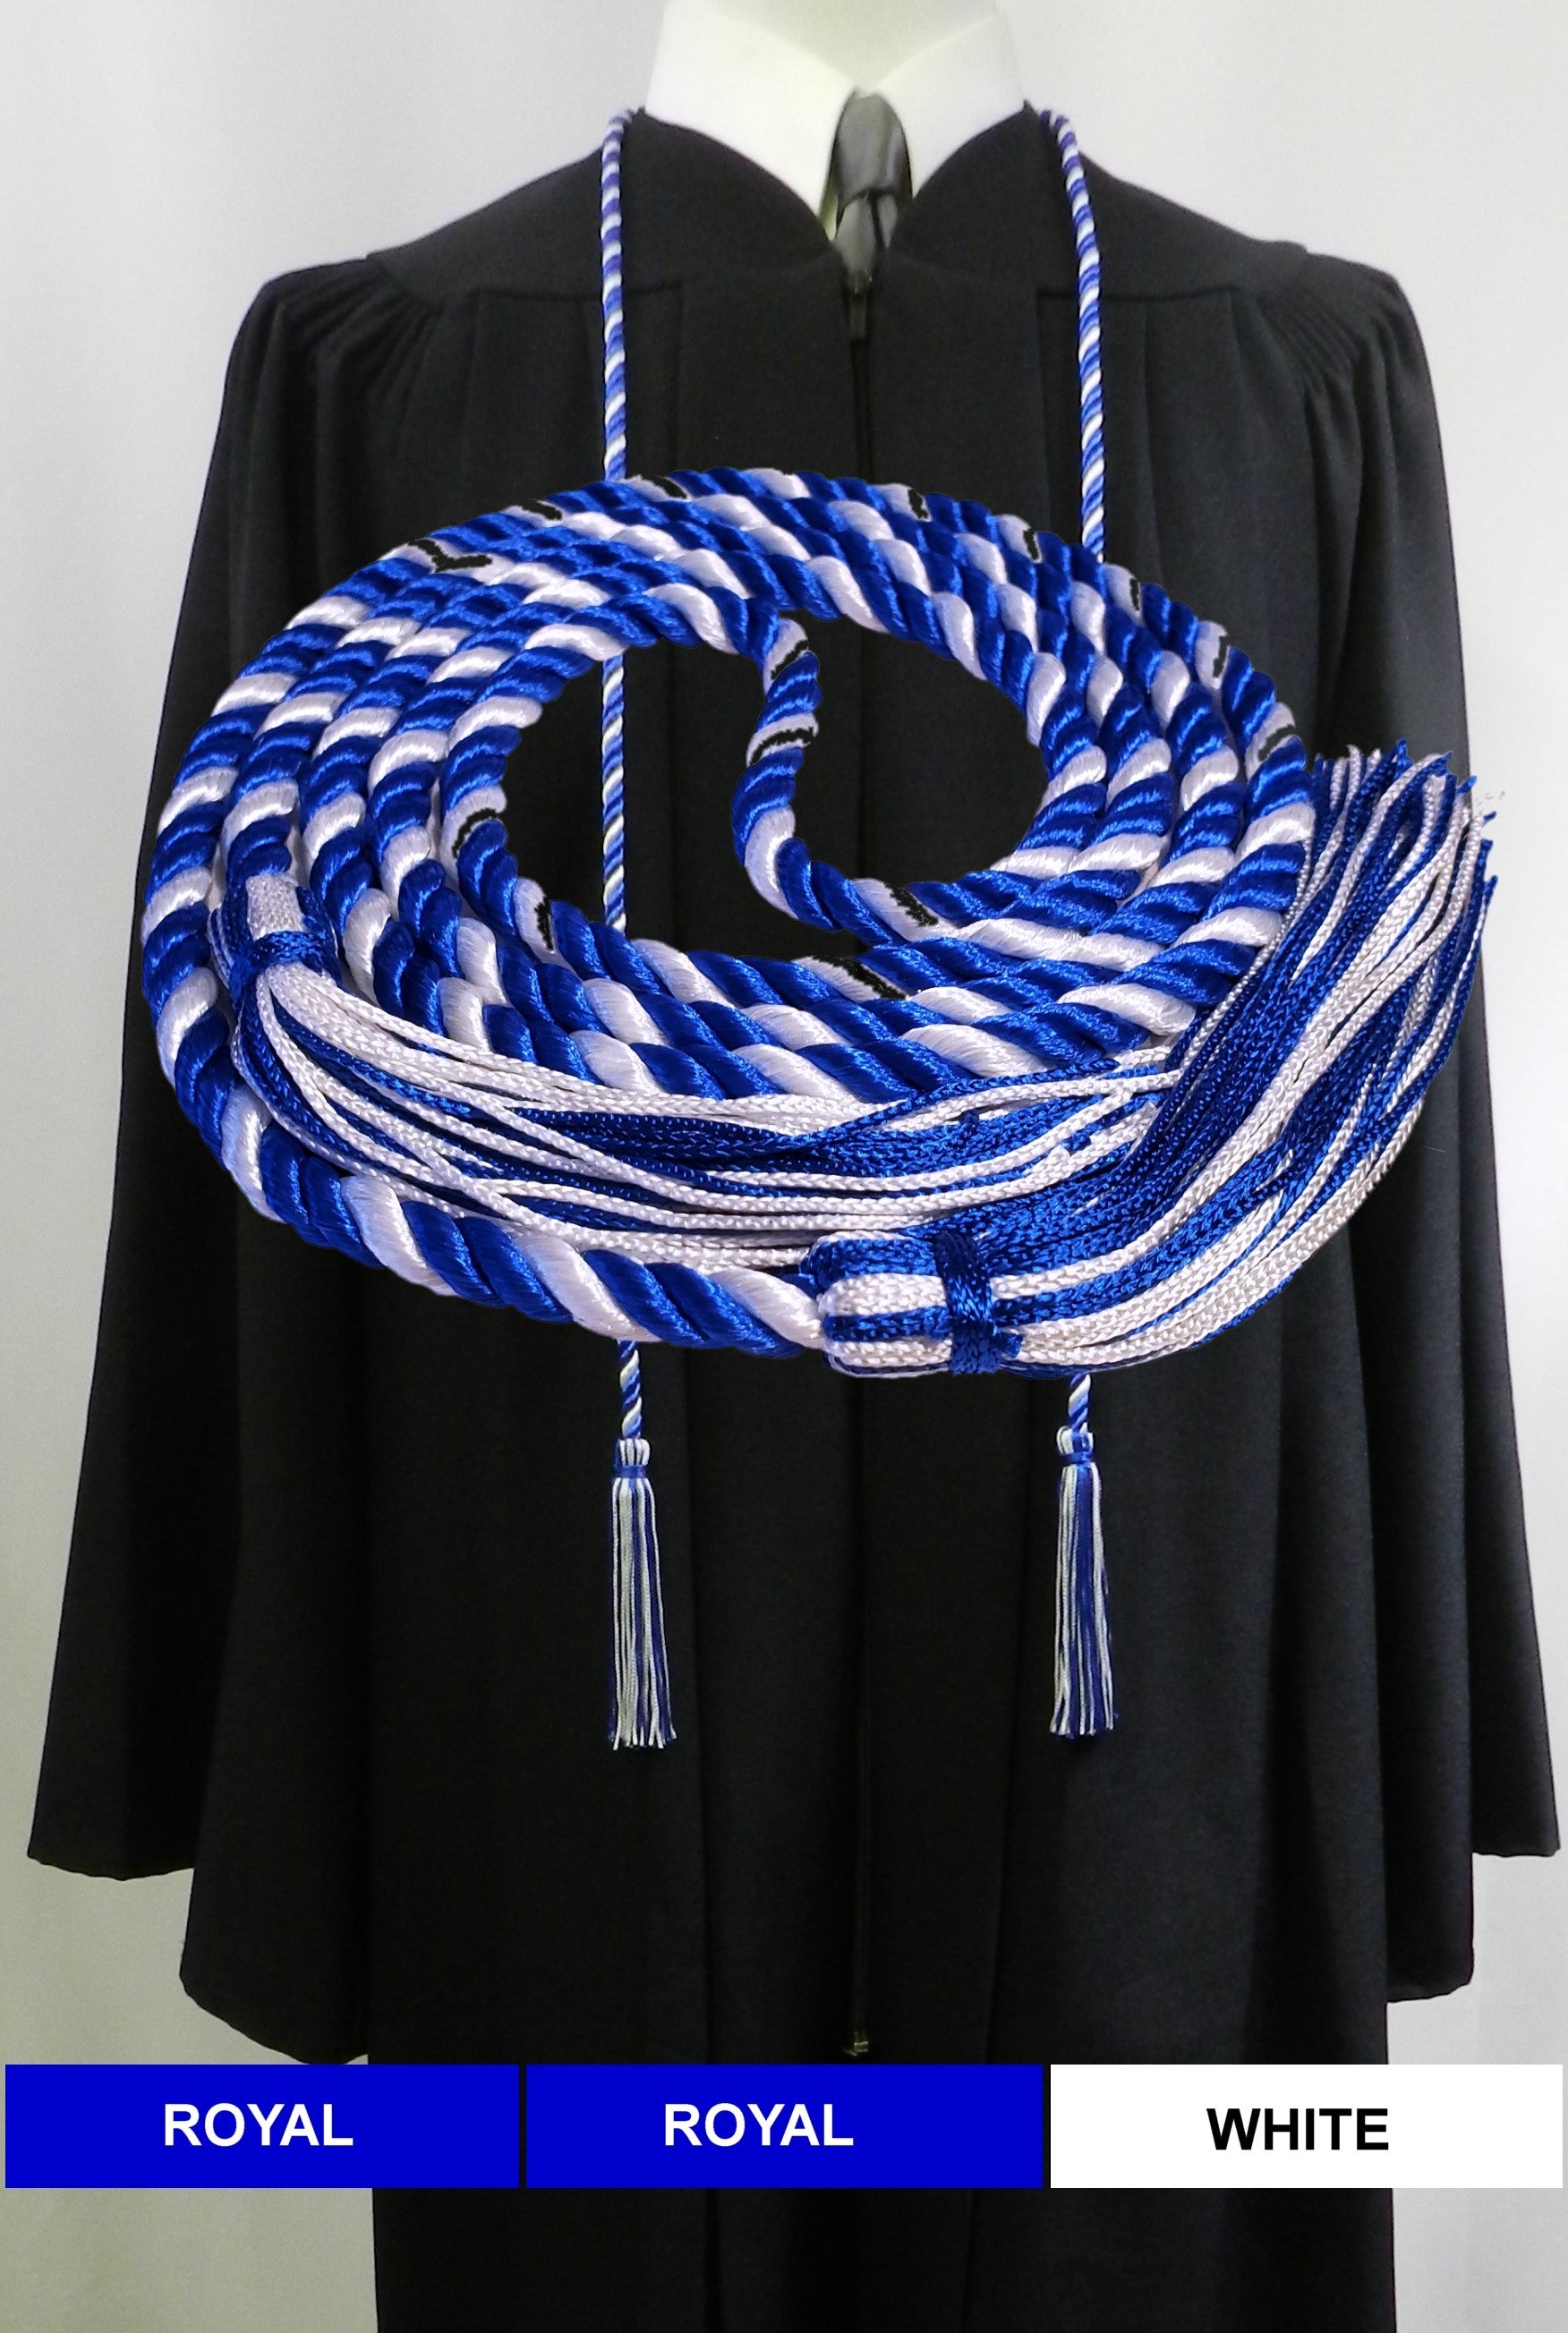 Royal Blue White Honor Cords  Senior Class Graduation Products